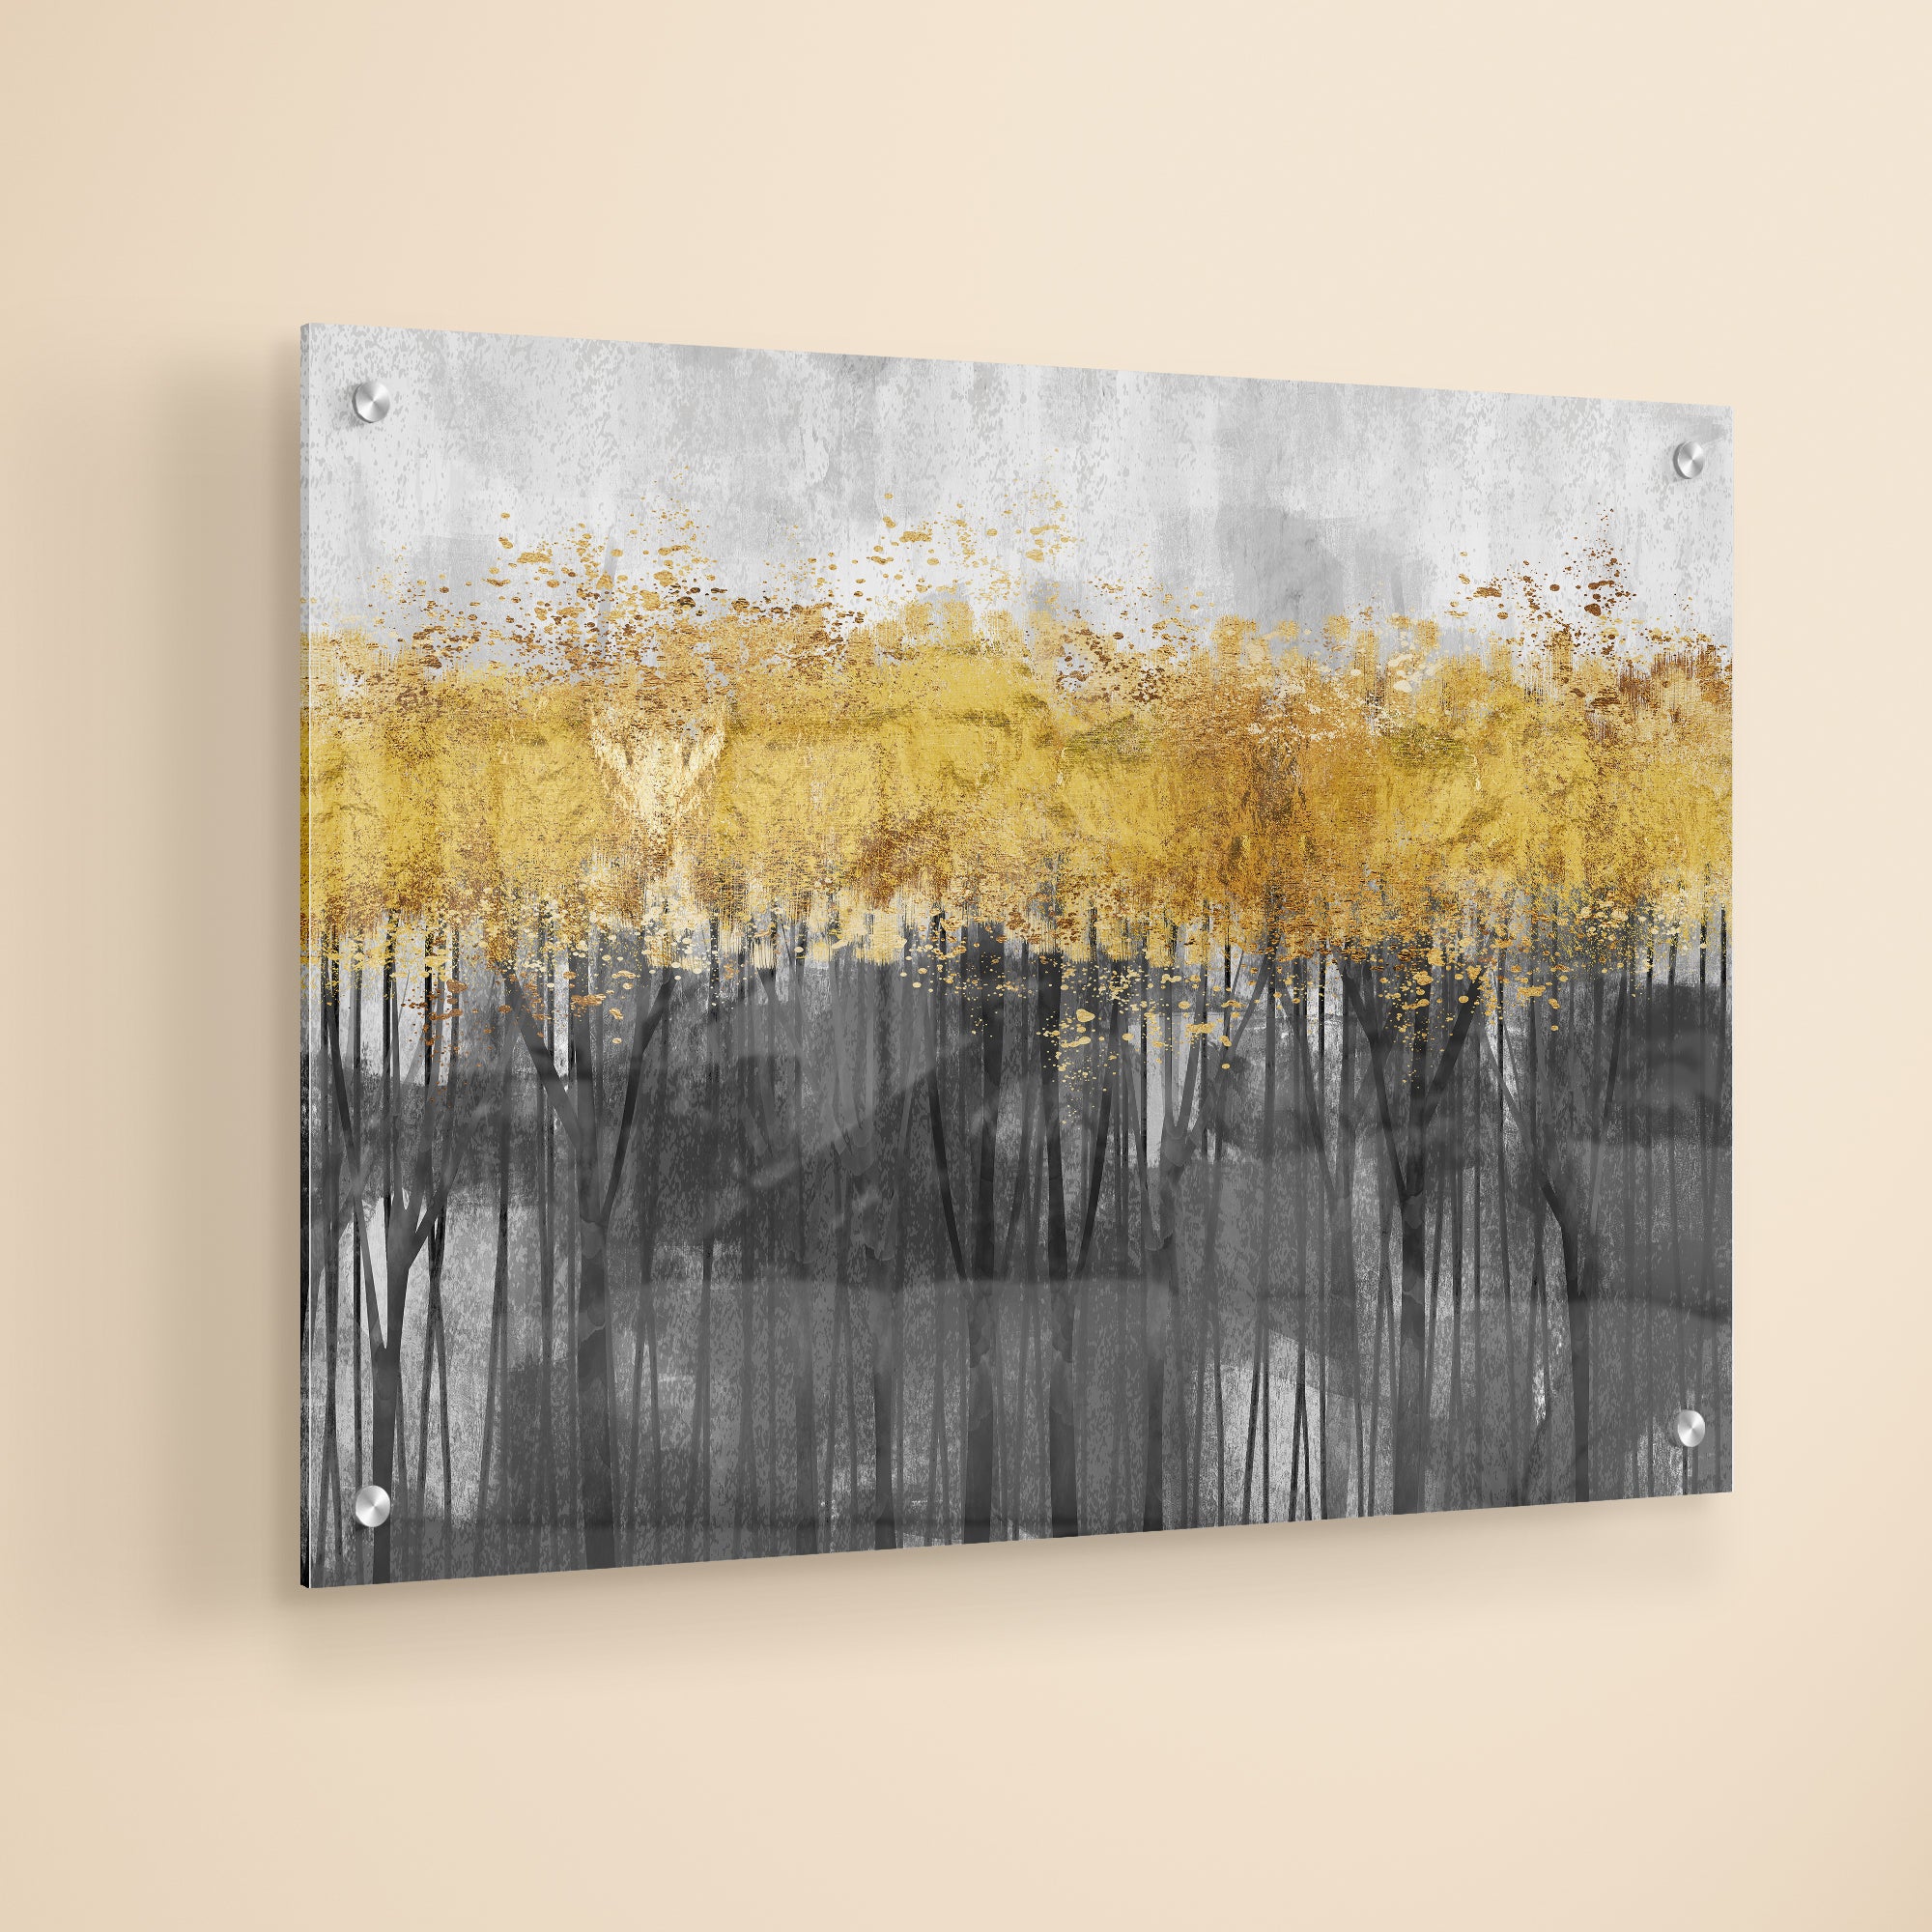 Abstract Golden And Black Modern Art Acrylic Wall Painting